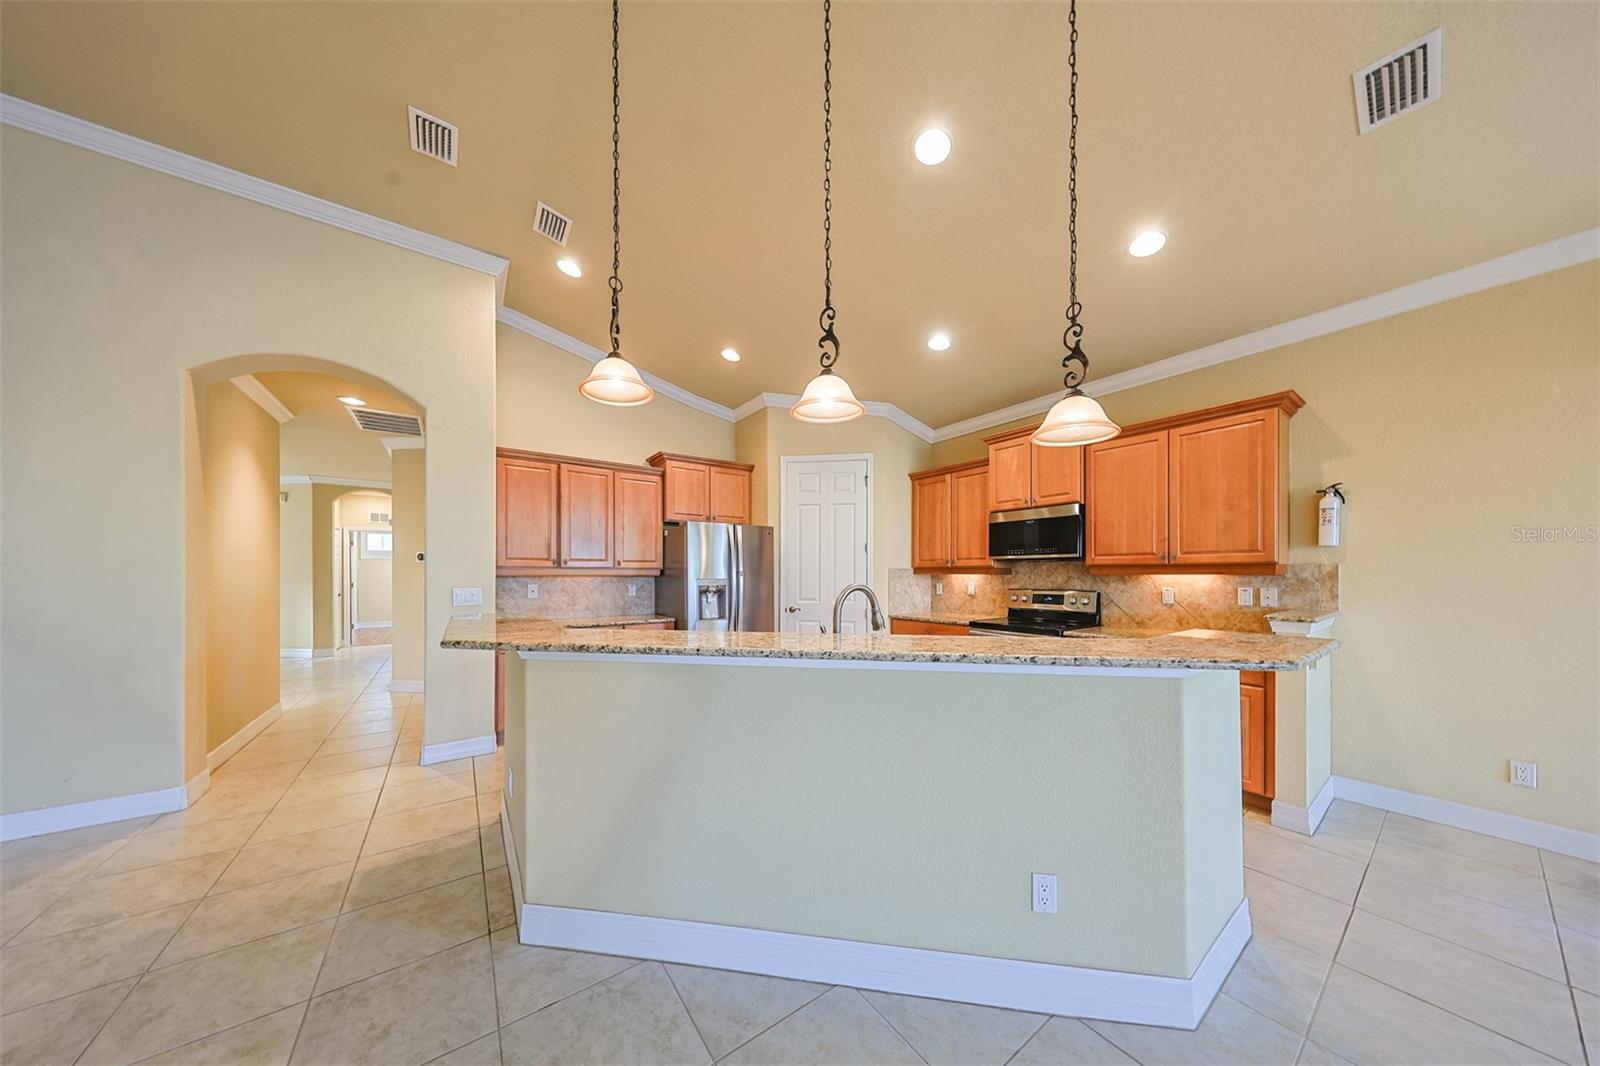 Beautiful soft earth tones in this kitchen, along with lots of lighting and space help to make the task of cooking and preparing that perfect meal enjoyable.  All the while having water and golf course views to enjoy.